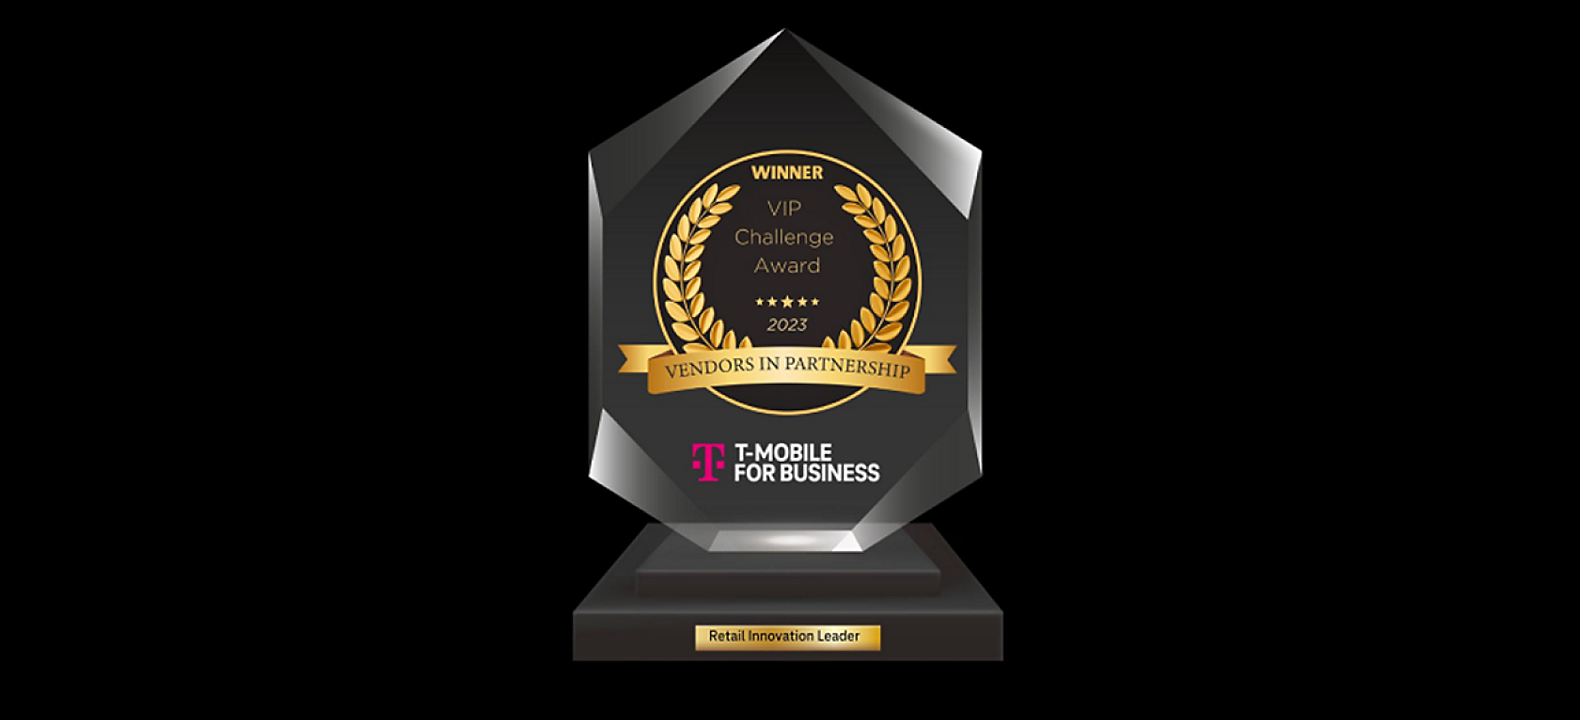 A crystal Vendor in Partnership Challenge Award recognizing T-Mobile for Business as a Retail Innovation Leader.